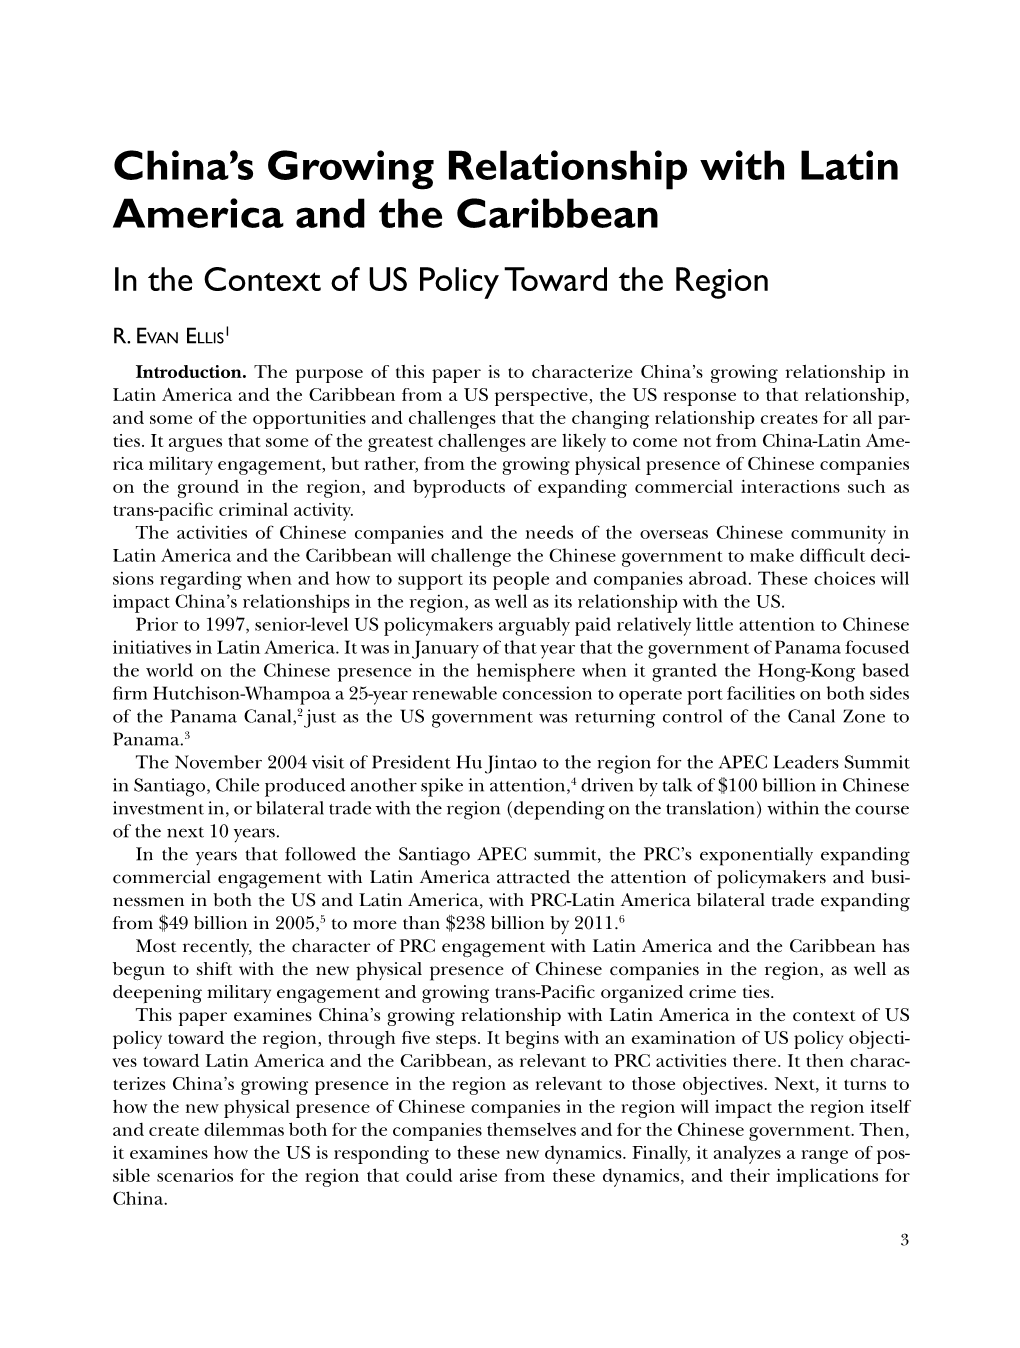 China's Growing Relationship with Latin America and the Caribbean